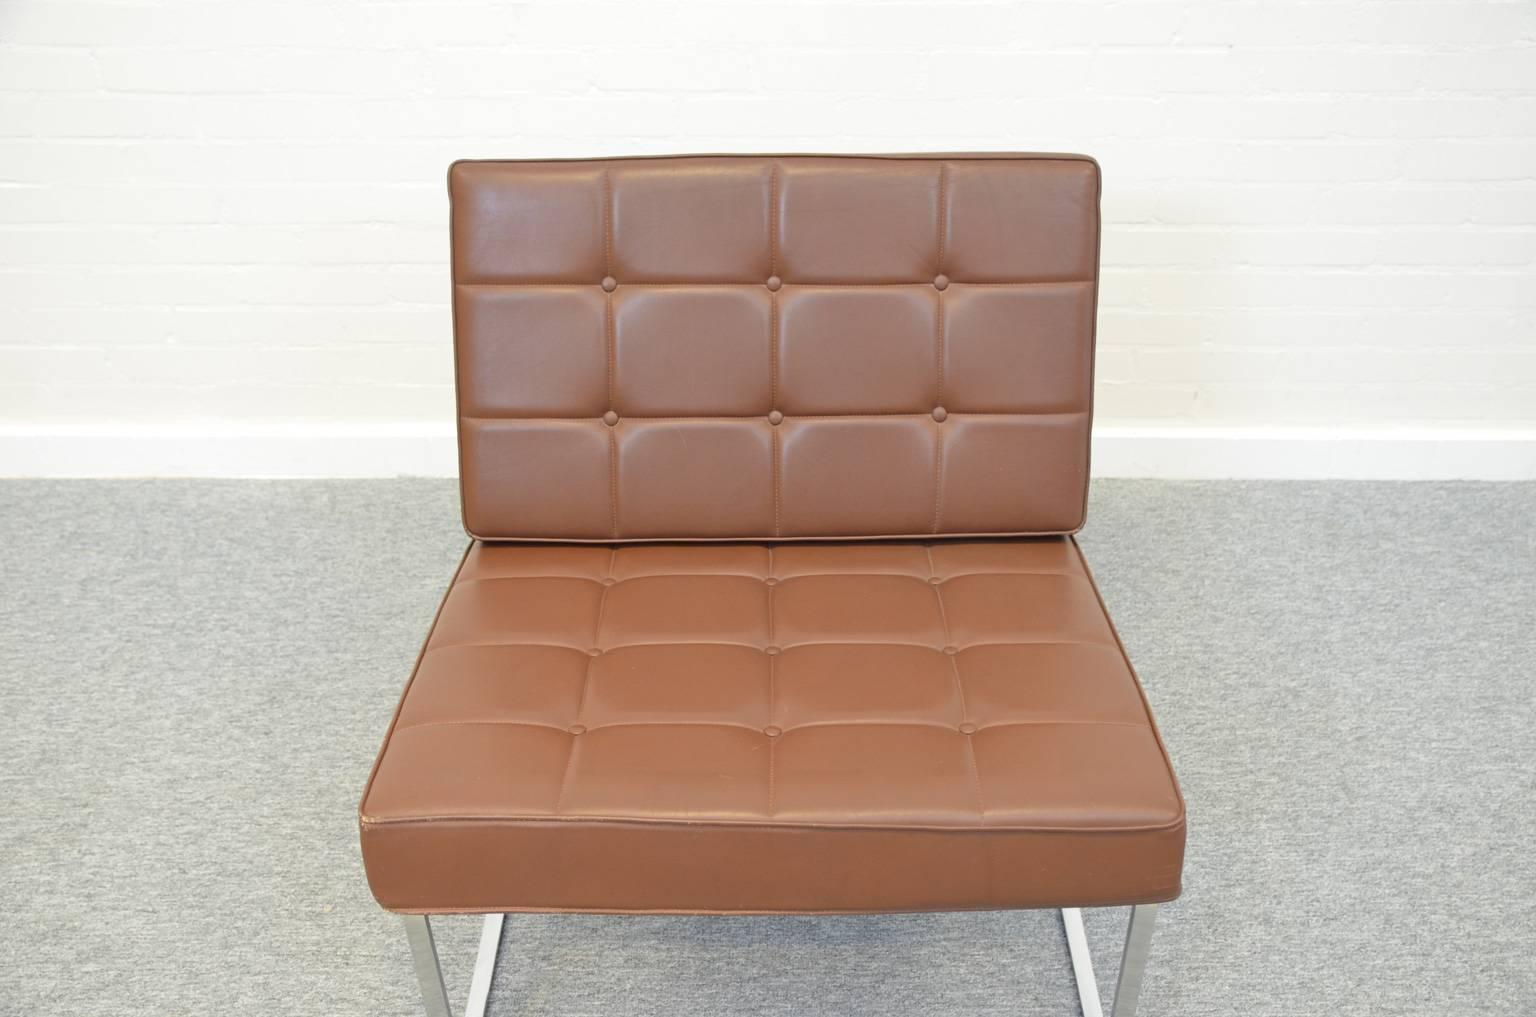 Lounge chair model 024 by Kho Liang Ie, made of metal, wood and (brown) artificial leather. Firm seating because of the use of wooden slats under the cushions. The chair is in a very good condition, with minimal user marks.